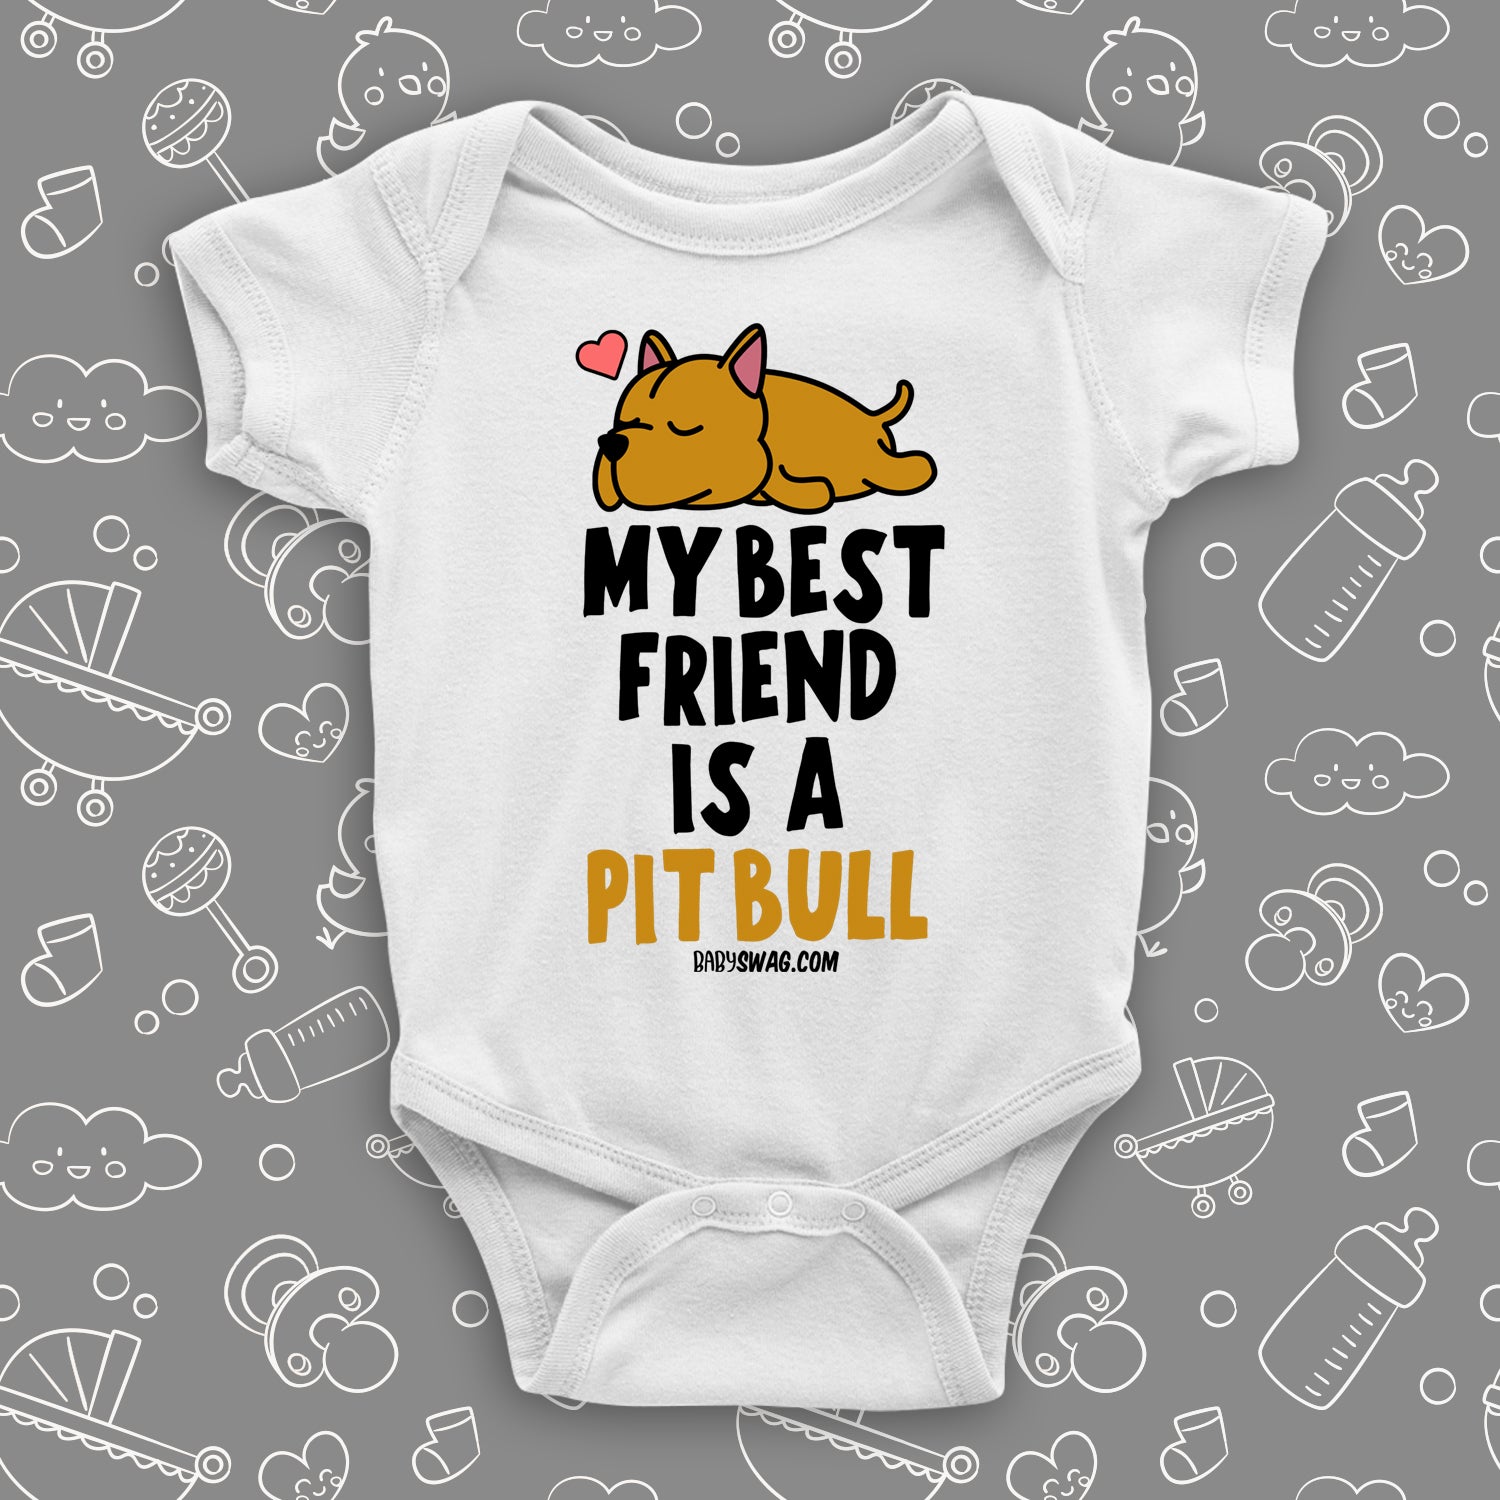 My Best Friend is a Pit Bull | Baby Swag